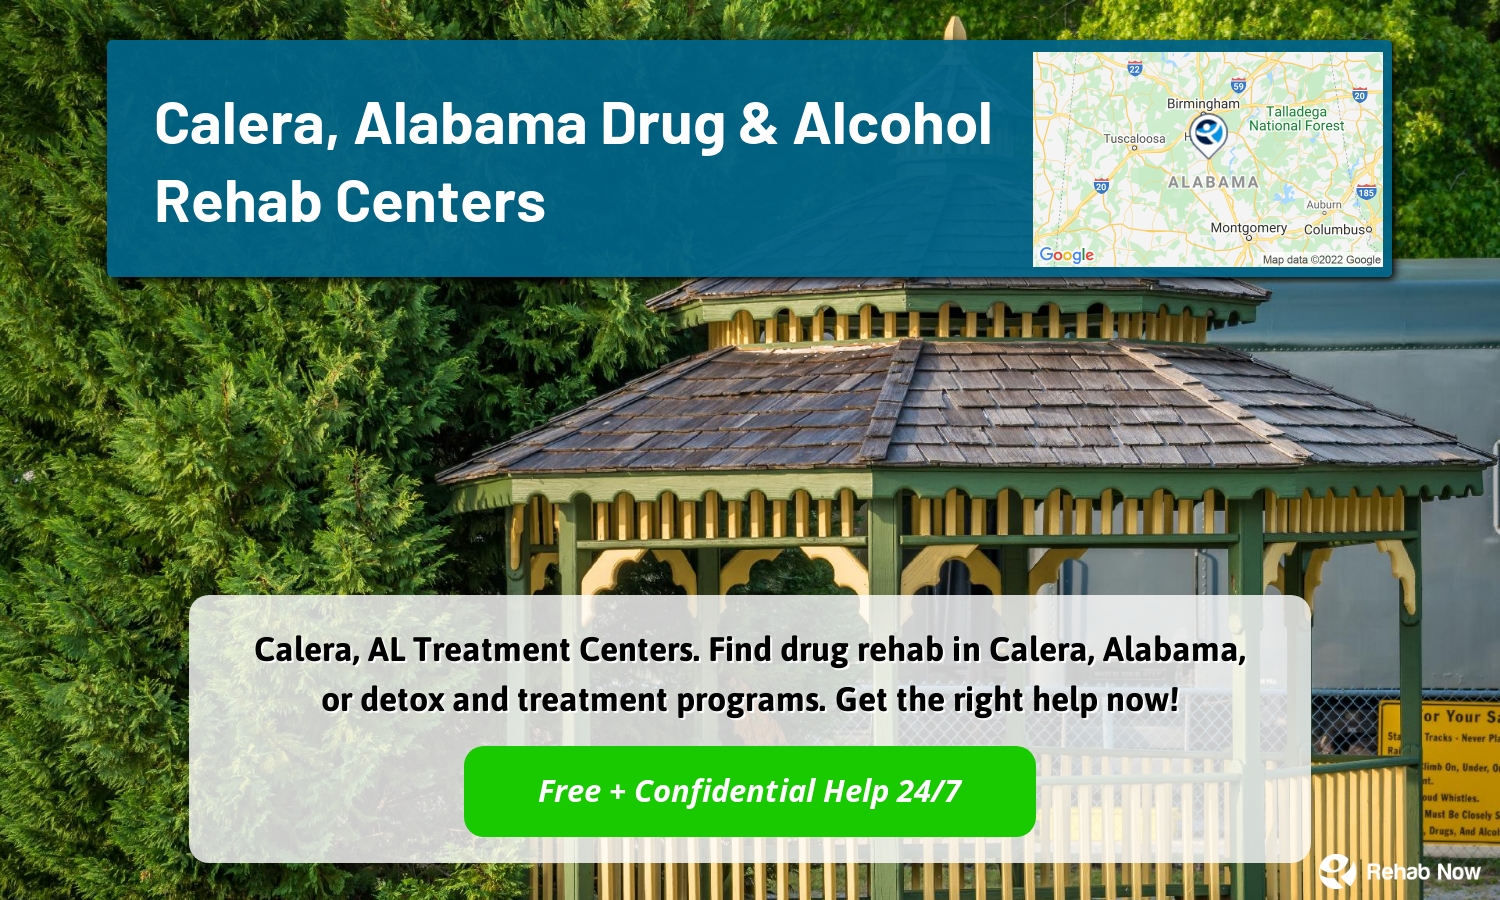 Calera, AL Treatment Centers. Find drug rehab in Calera, Alabama, or detox and treatment programs. Get the right help now!